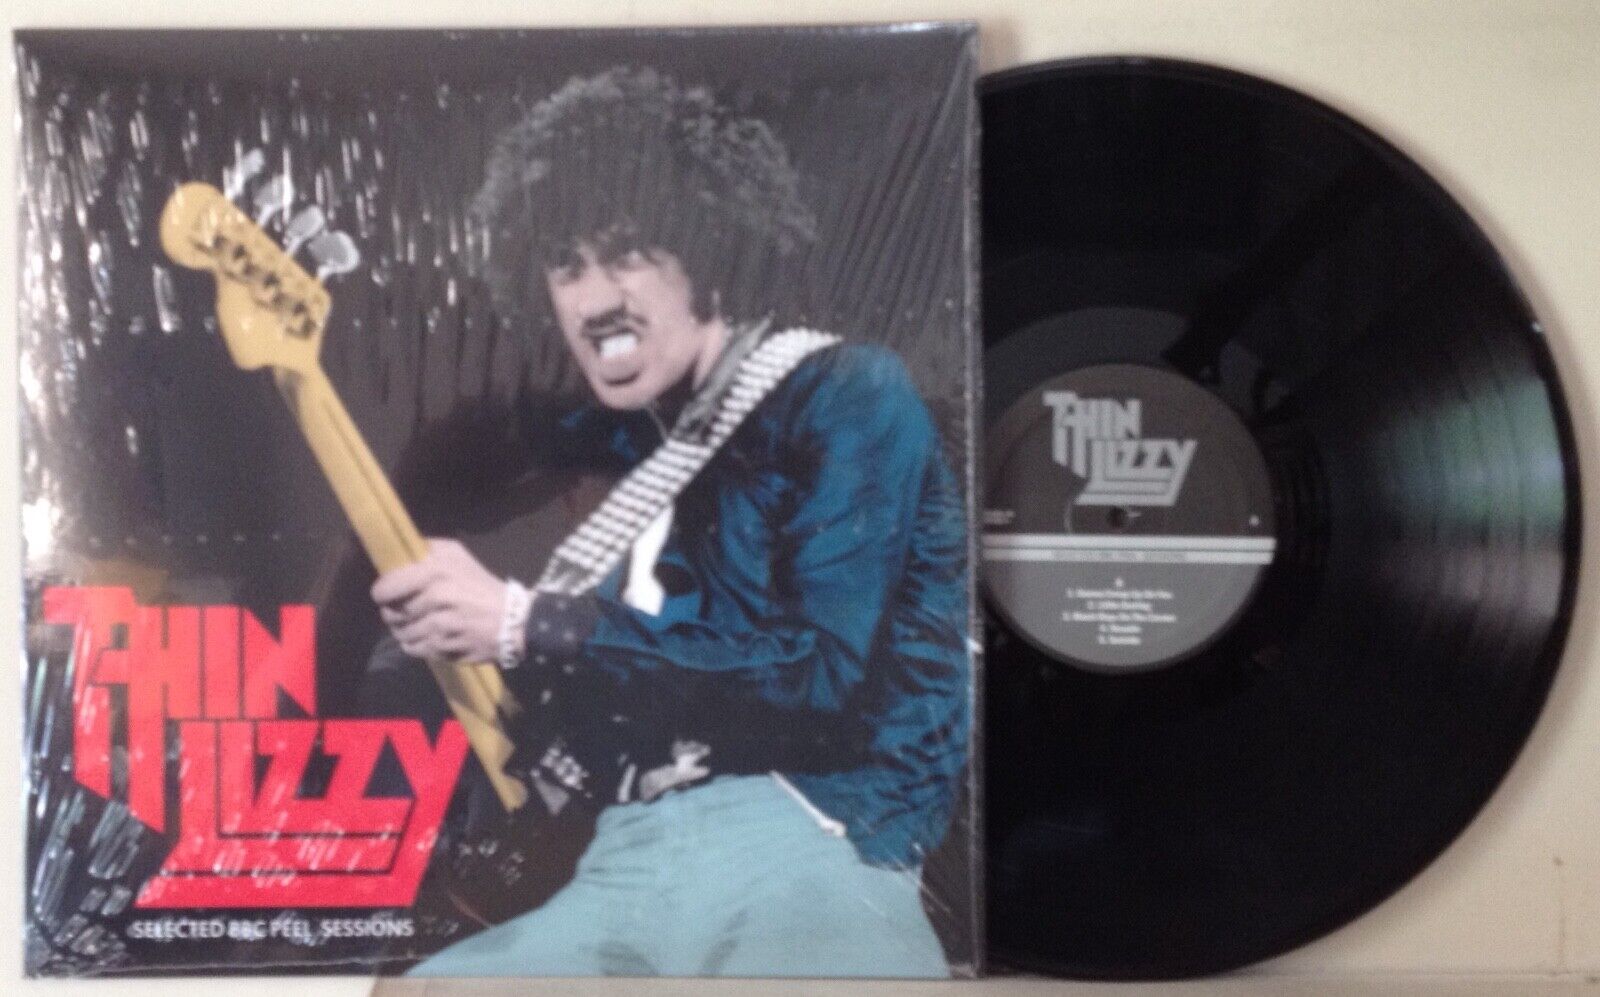 SEALED~Thin Lizzy~Selected BBC Peel Sessions LP Rare 1973-77 UK Radio Shows~MINT